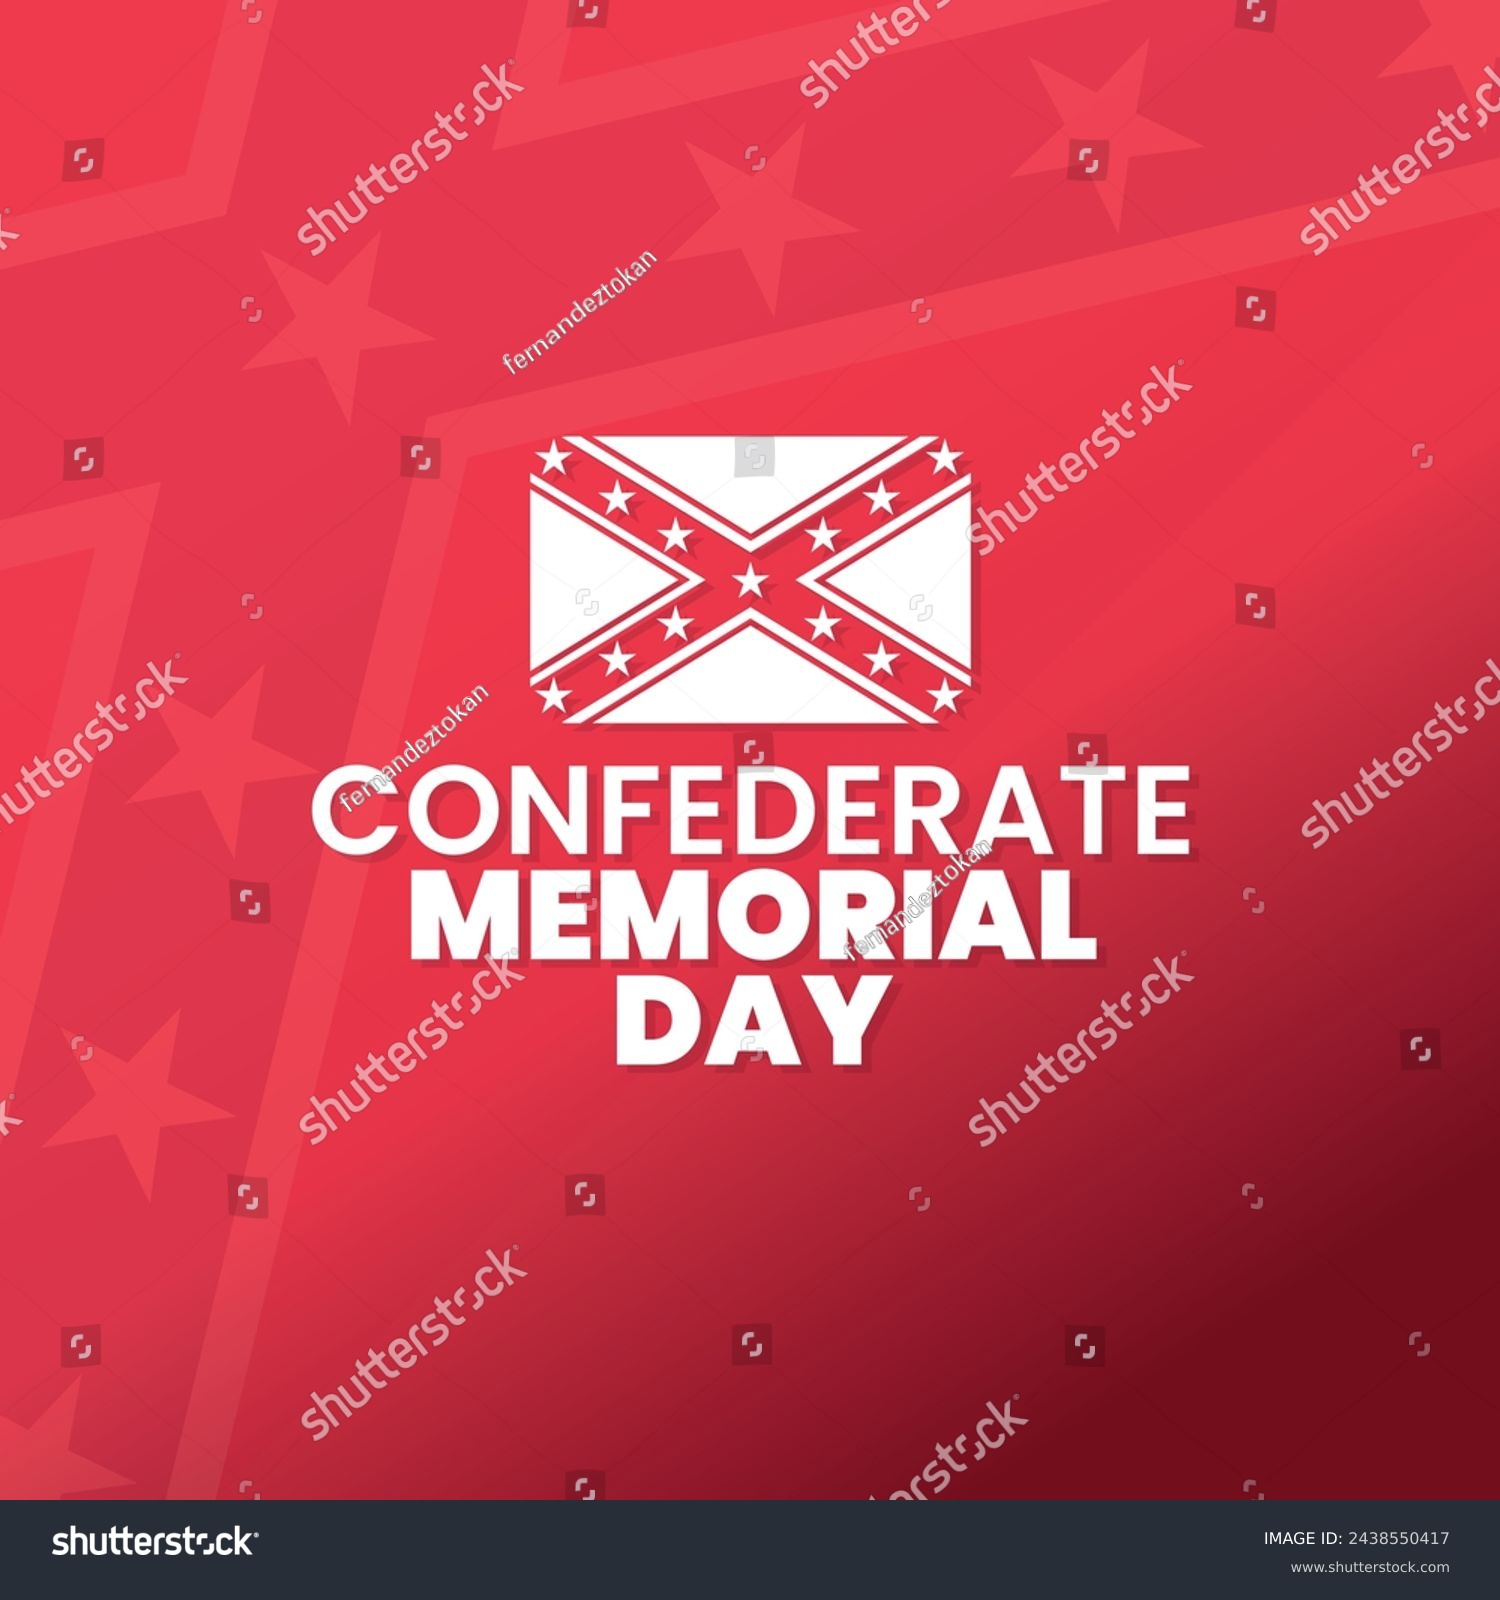 SVG of Confederate Memorial Day, April, suitable for social media post, card greeting, banner, template design, print, suitable for event, vector illustration, with confederate battle flag illustration. svg